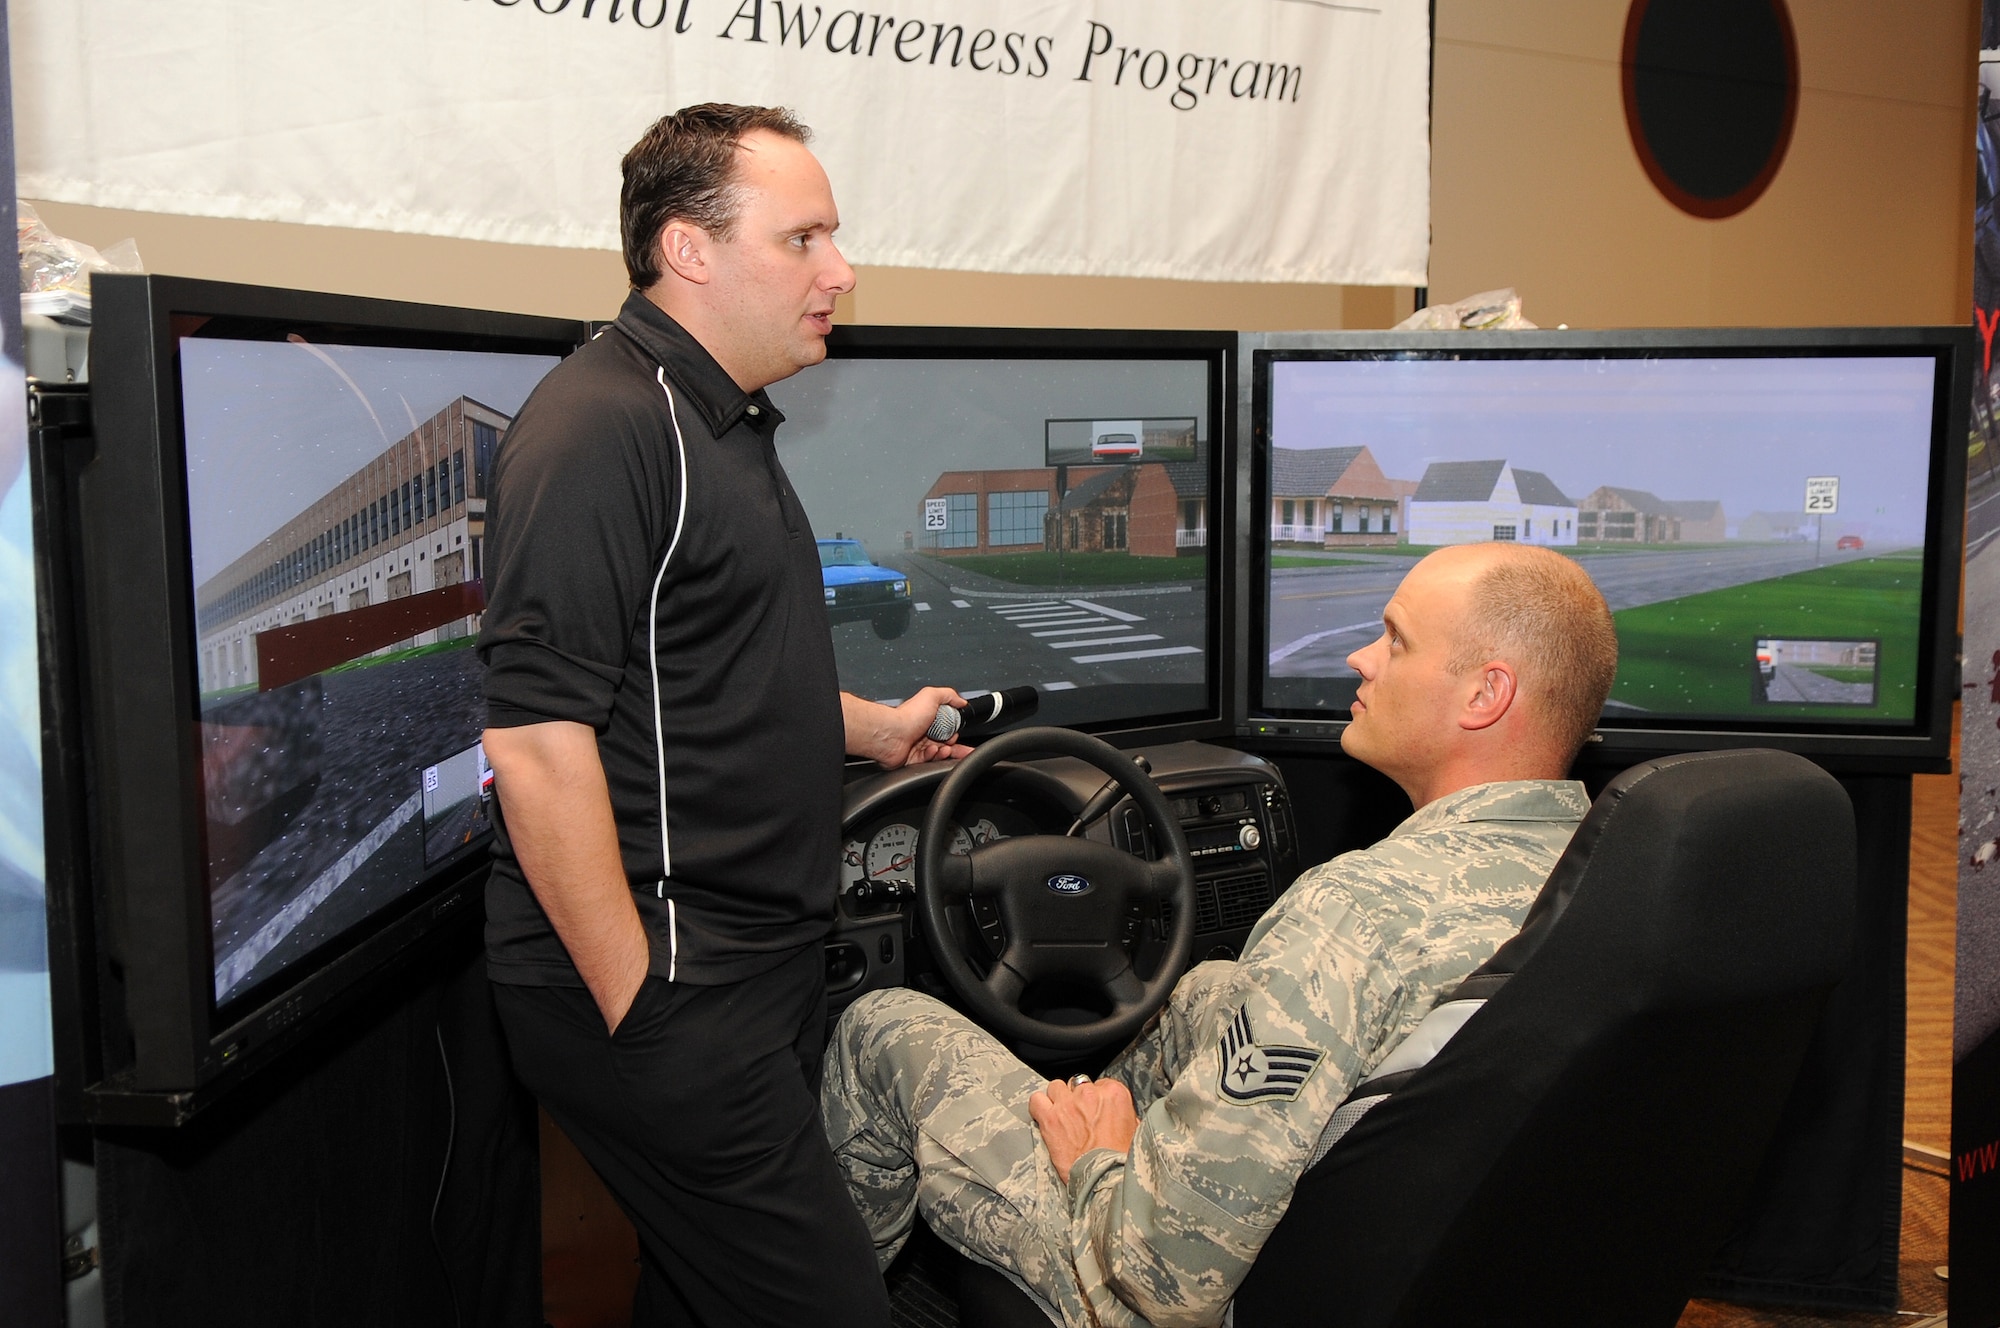 BUCKLEY AIR FORCE BASE, Colo. -- Staff Sgt. Jeffrey Fitzmorris, 460th Space Wing, gears up to "drive drunk" in the Save-a-Life Tour drunk driving simulator May 20. The Save-a-Life Tour offers individuals the chance to experience from a sober point of view the world of driving while under the influence. ( U.S. Air Force Photo by Airman 1st Class Marcy Glass )

